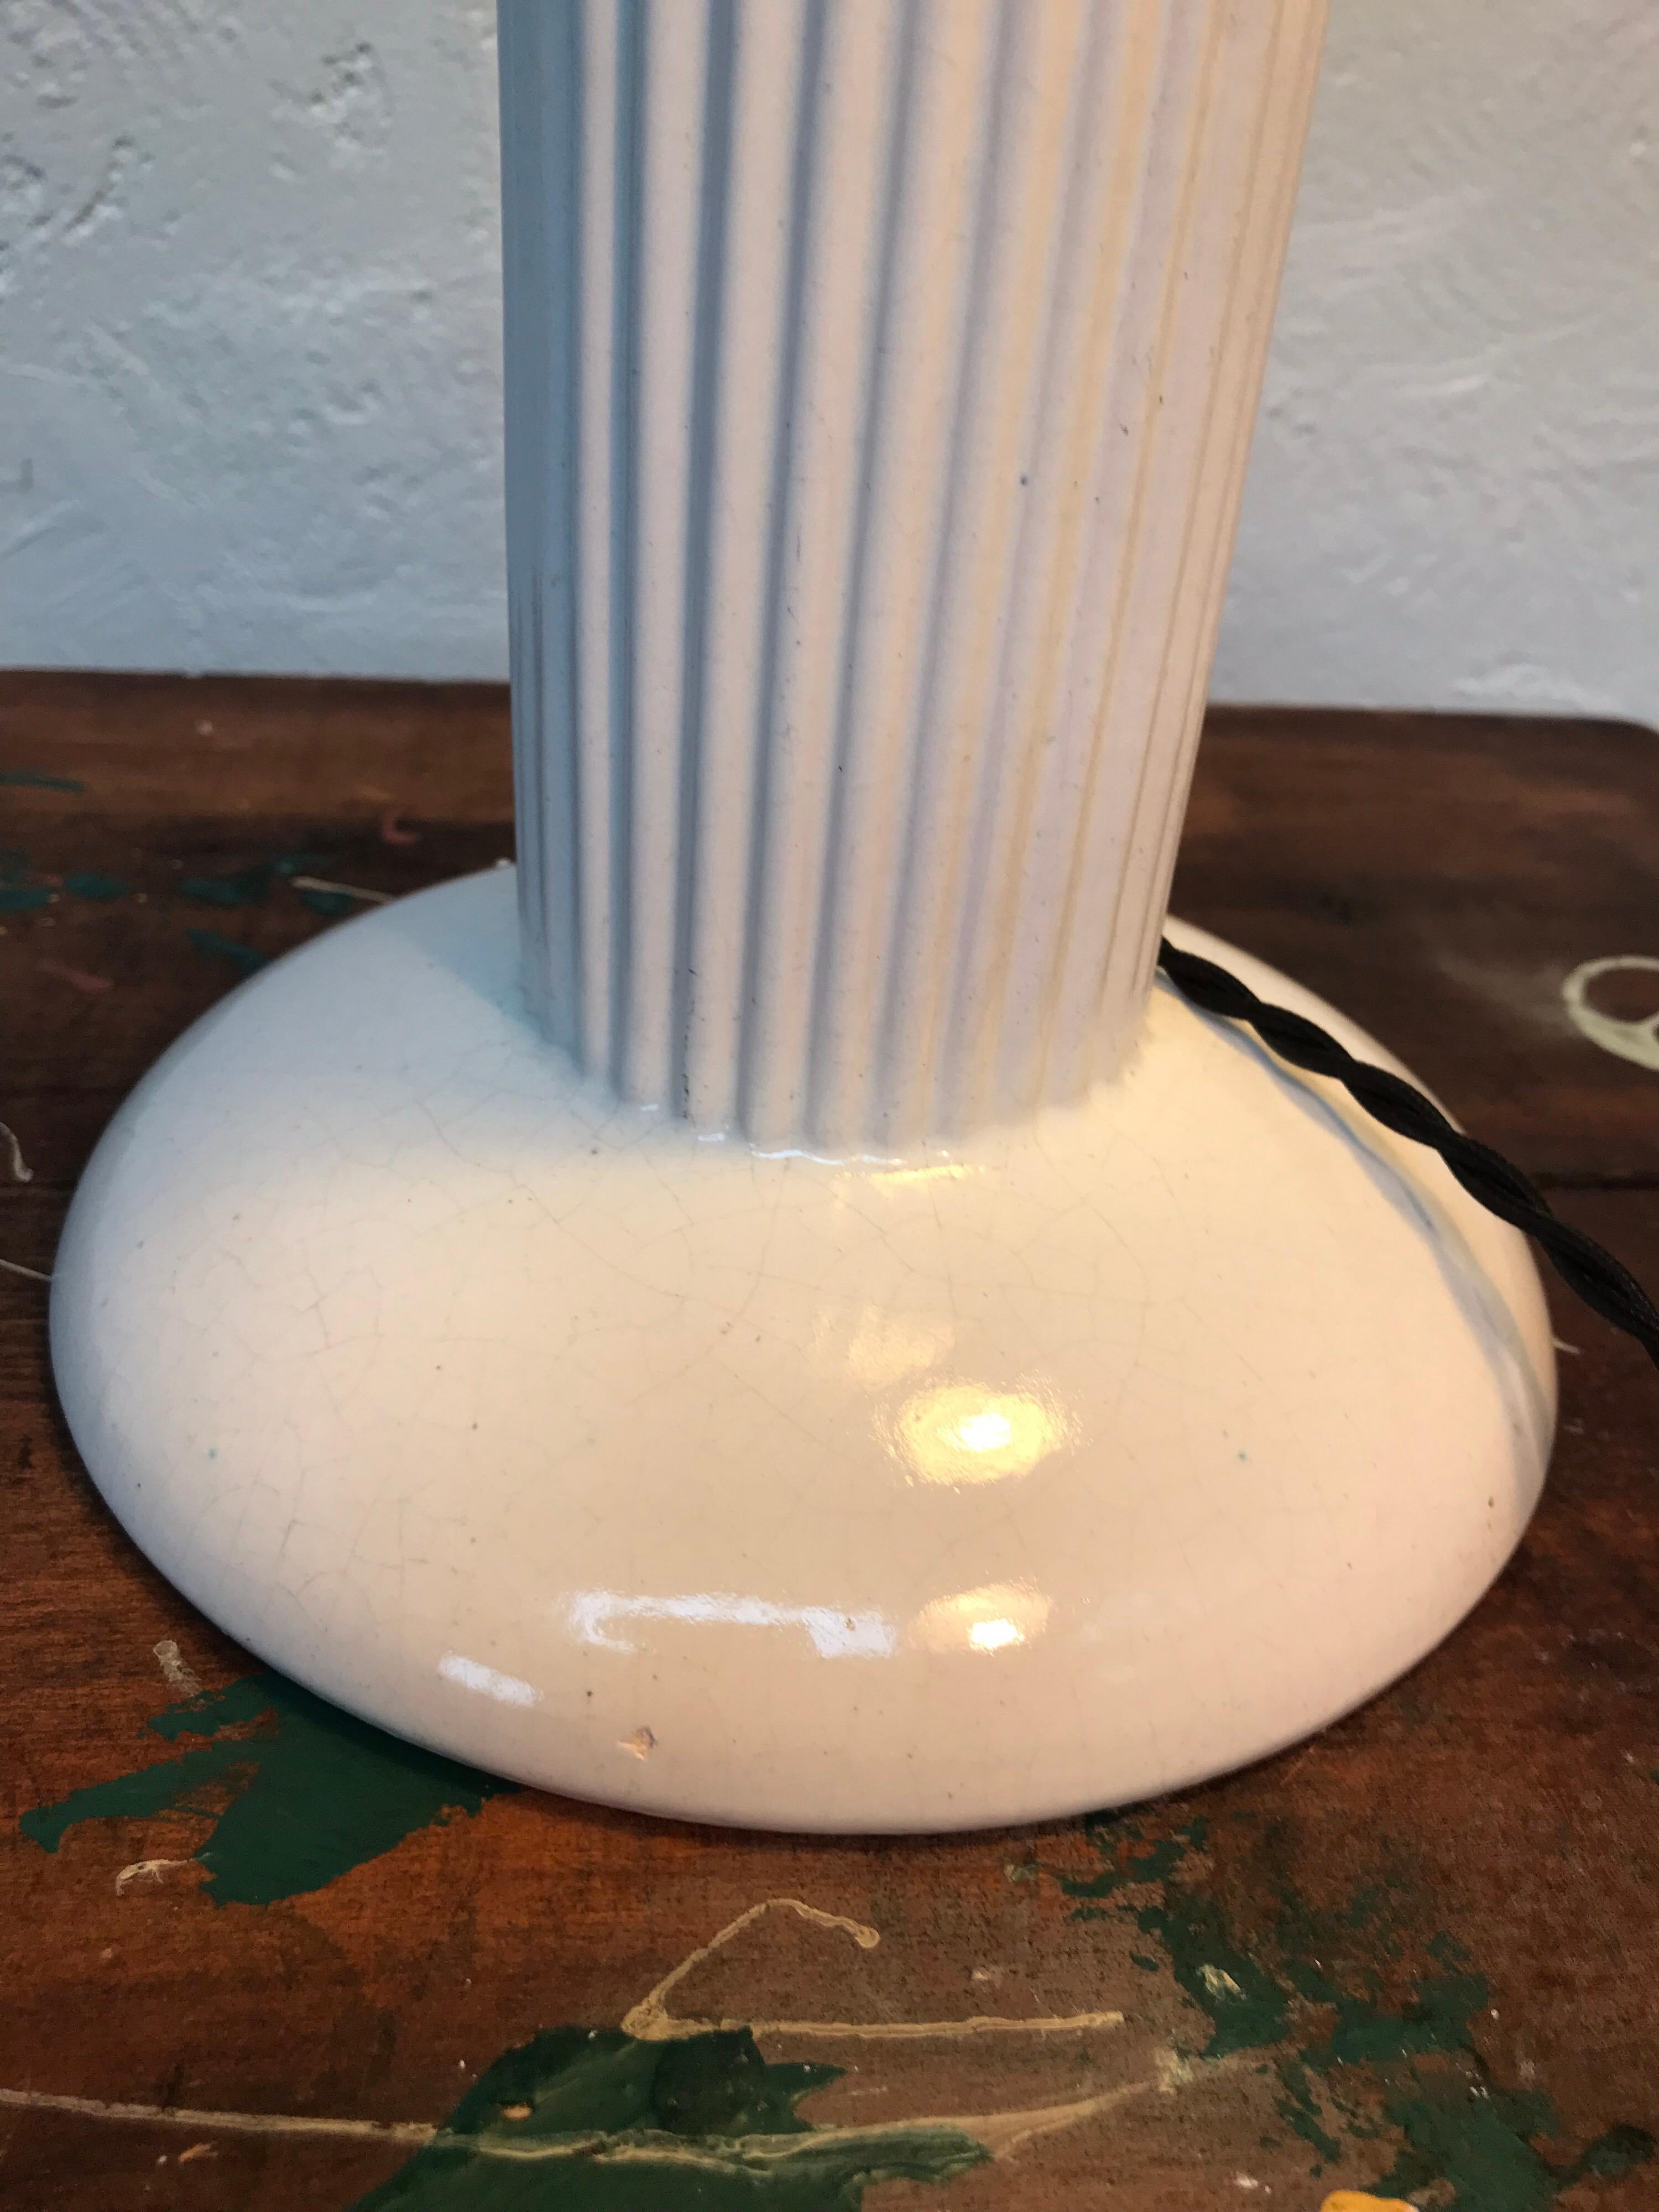 Hand-Crafted 1930s Michael Andersen Ceramic Table Lamp with an ArtbyMaj Lampshade